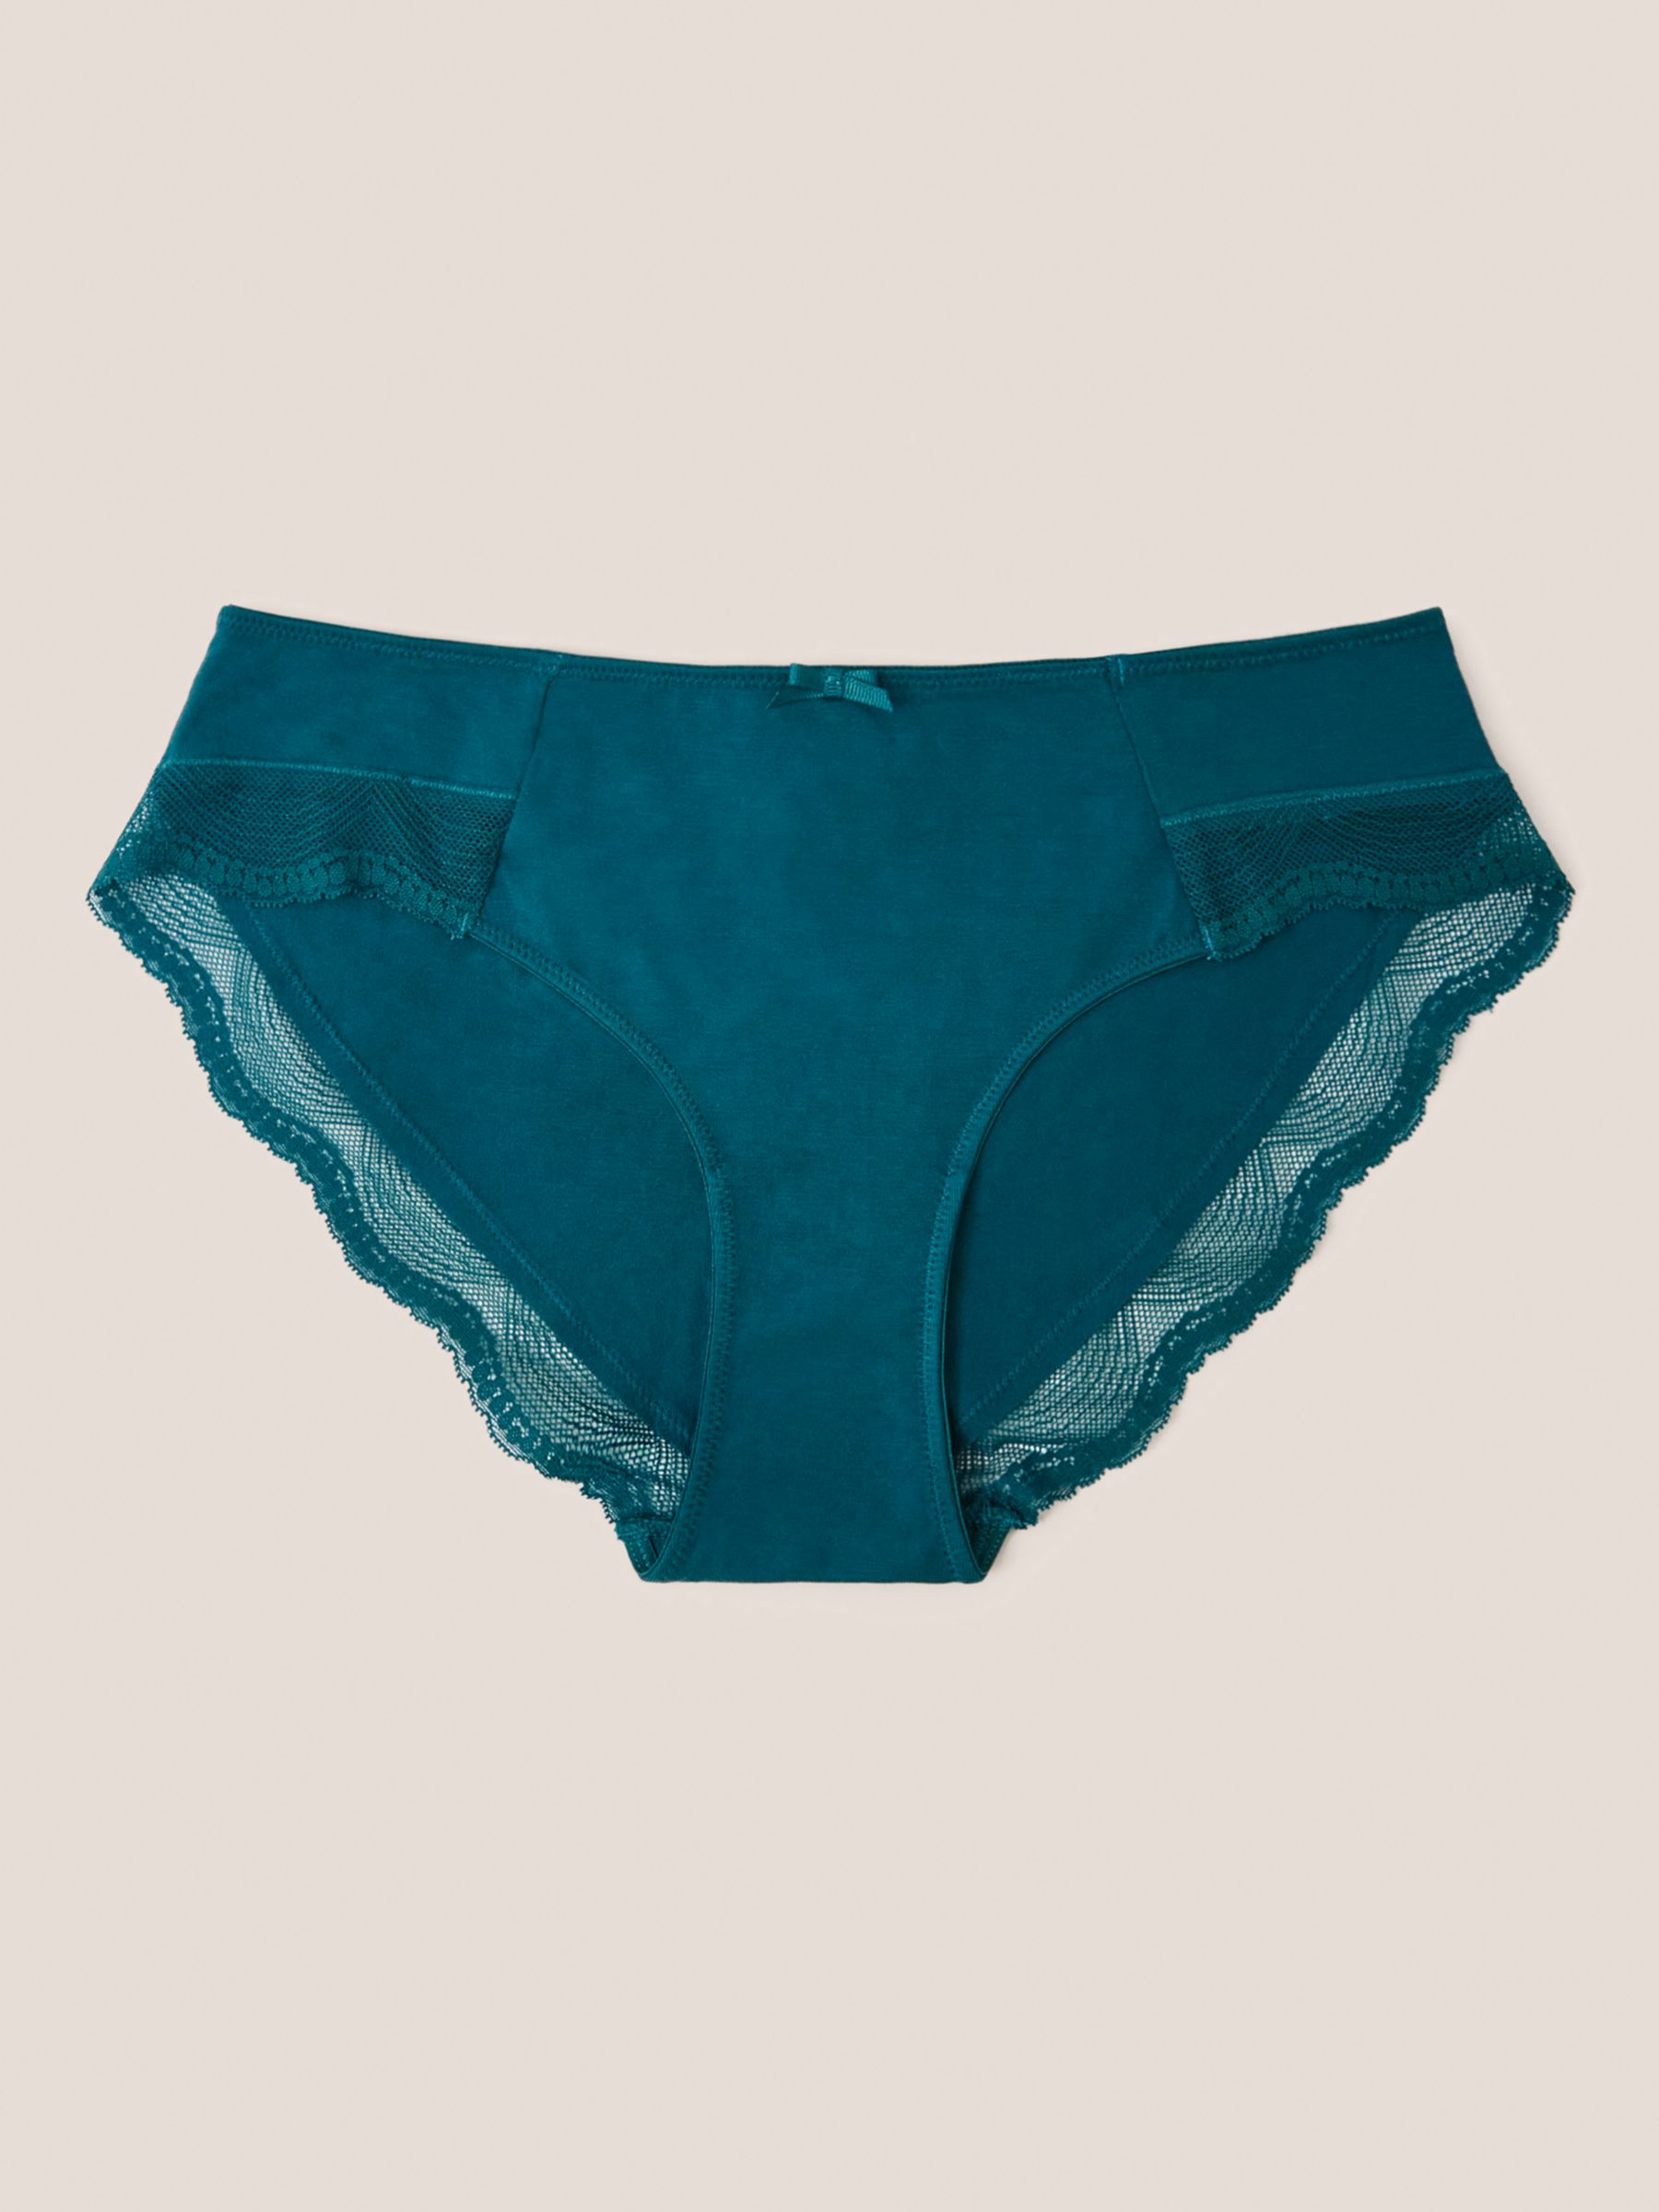 White Stuff Lace Trim Shortie Knickers, Mid Teal, XXL